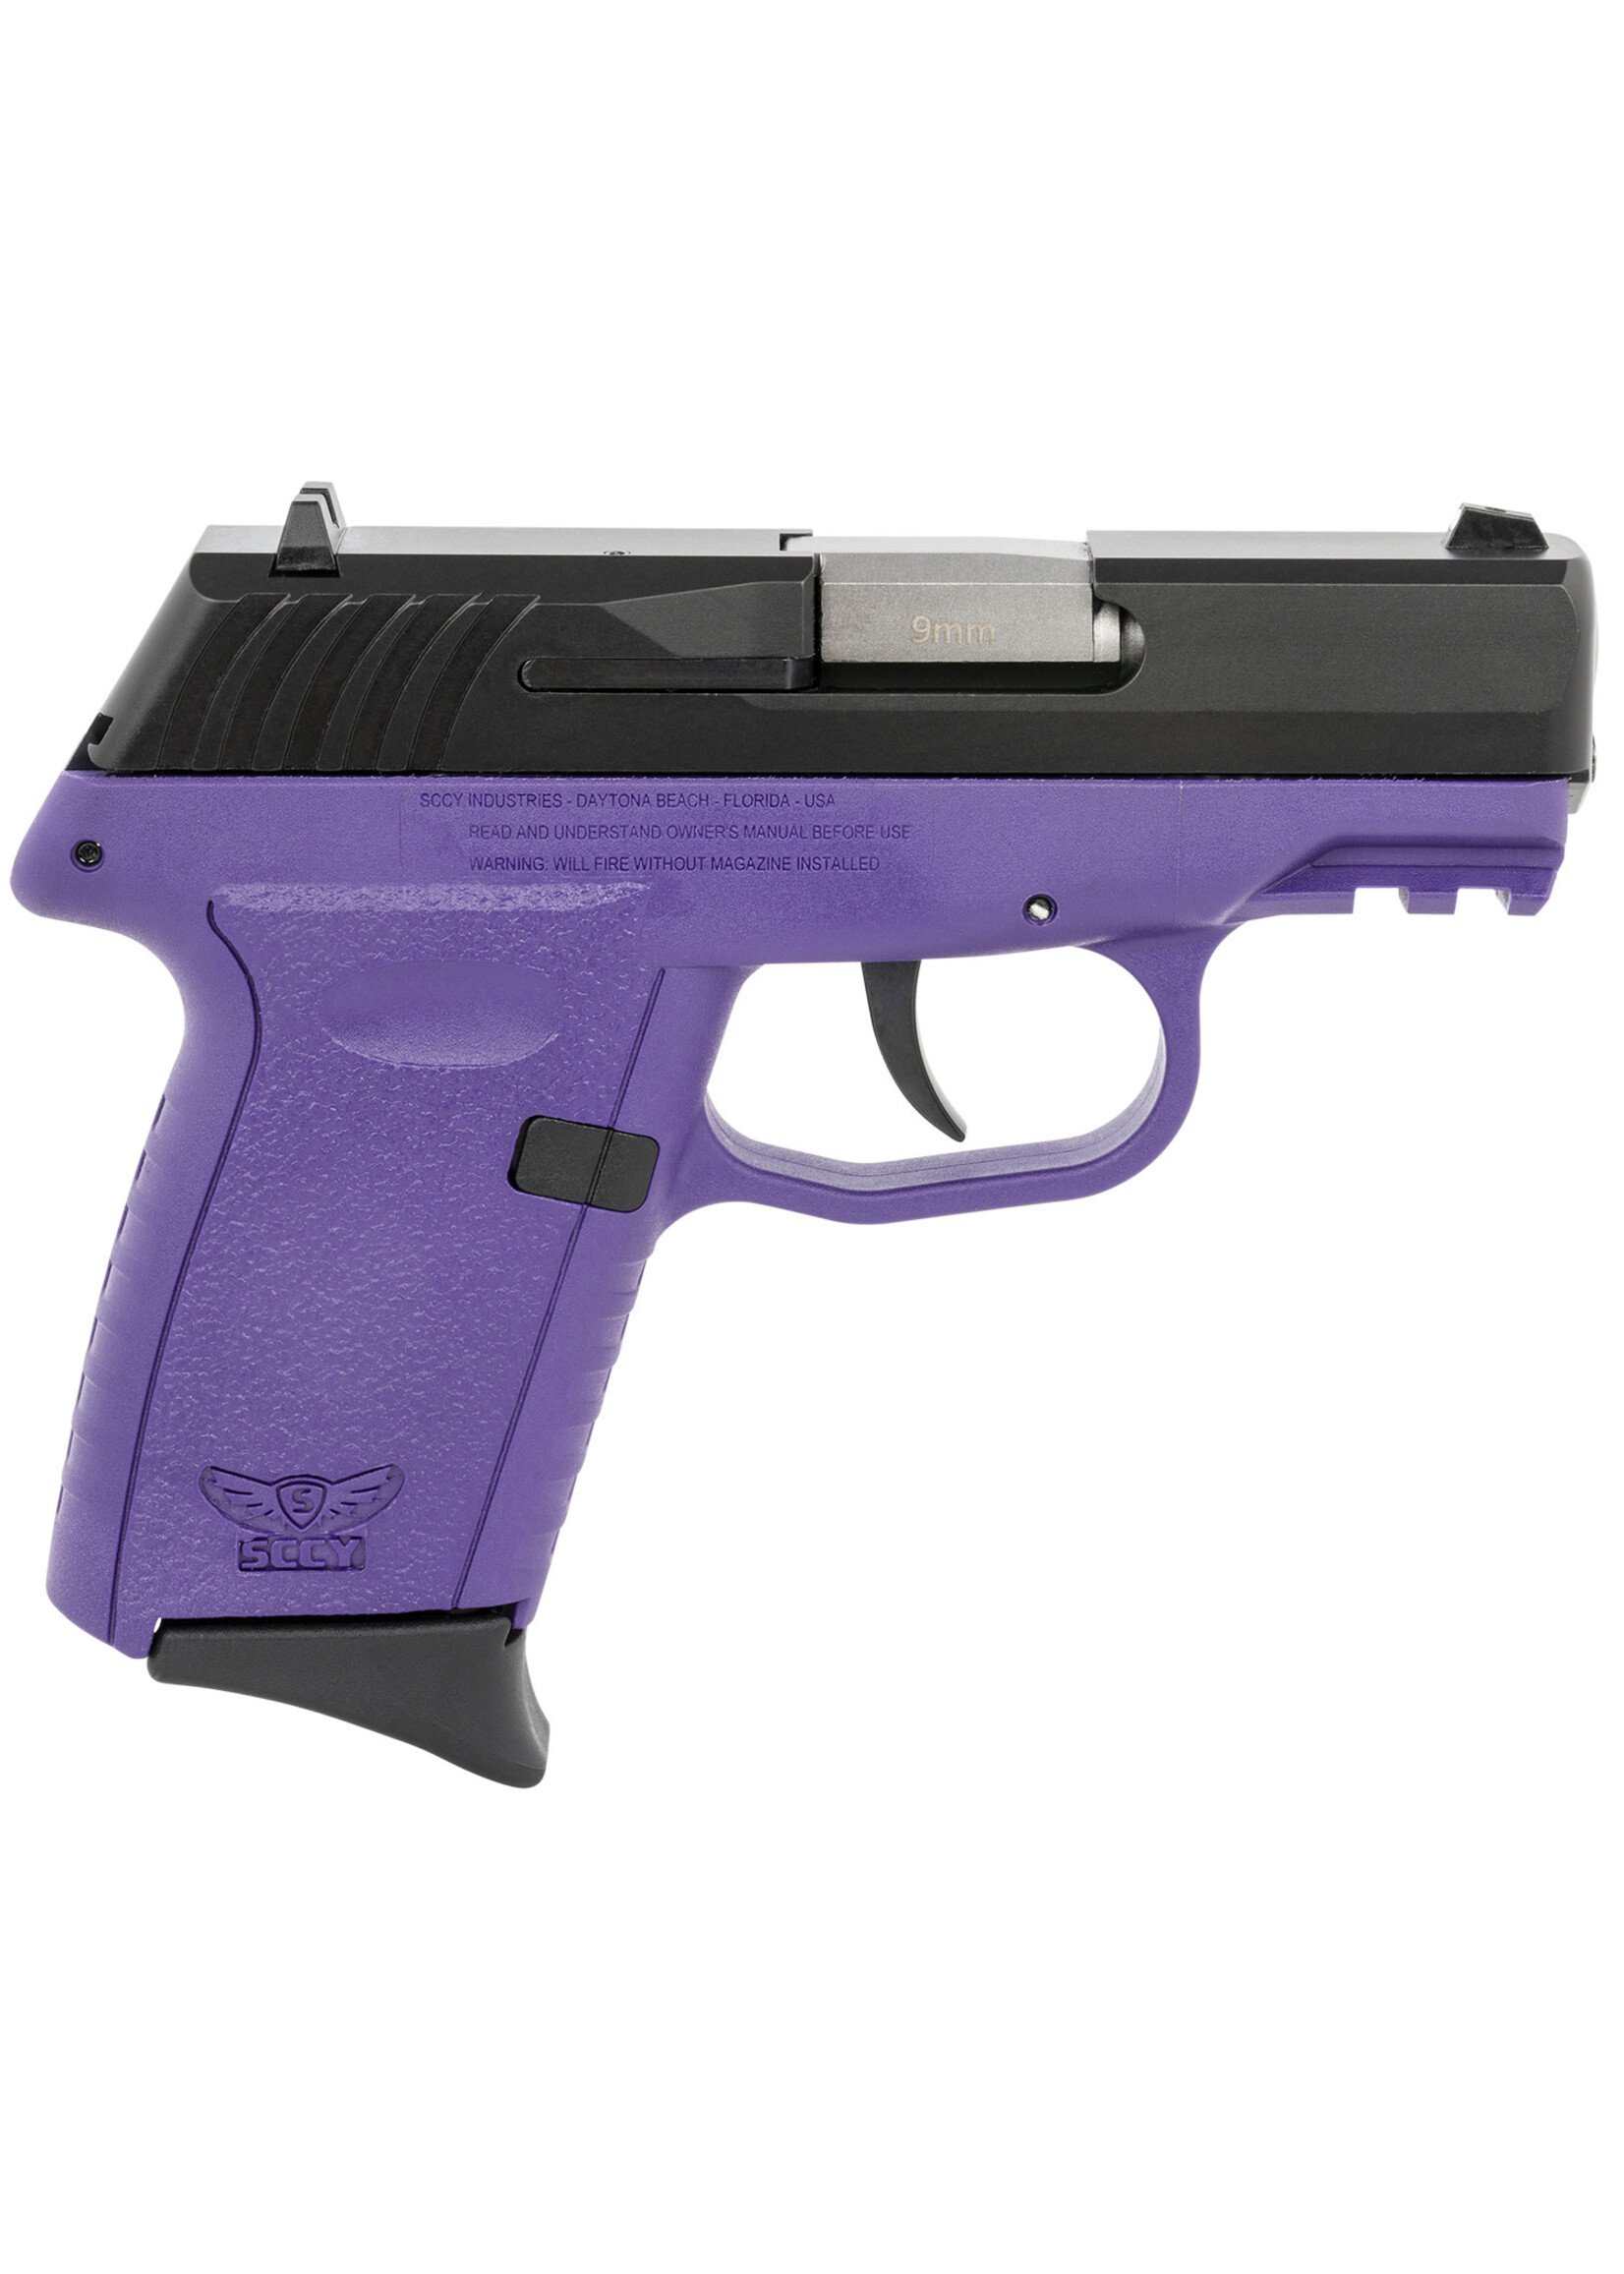 Sccy Industries SCCY Industries CPX-2 Gen3 9mm Luger Caliber with 3.10" Barrel, 10+1 Capacity, Purple Finish Picatinny Rail Frame, Serrated Black Nitride Stainless Steel Slide, Polymer Grip & No Manual Thumb Safety